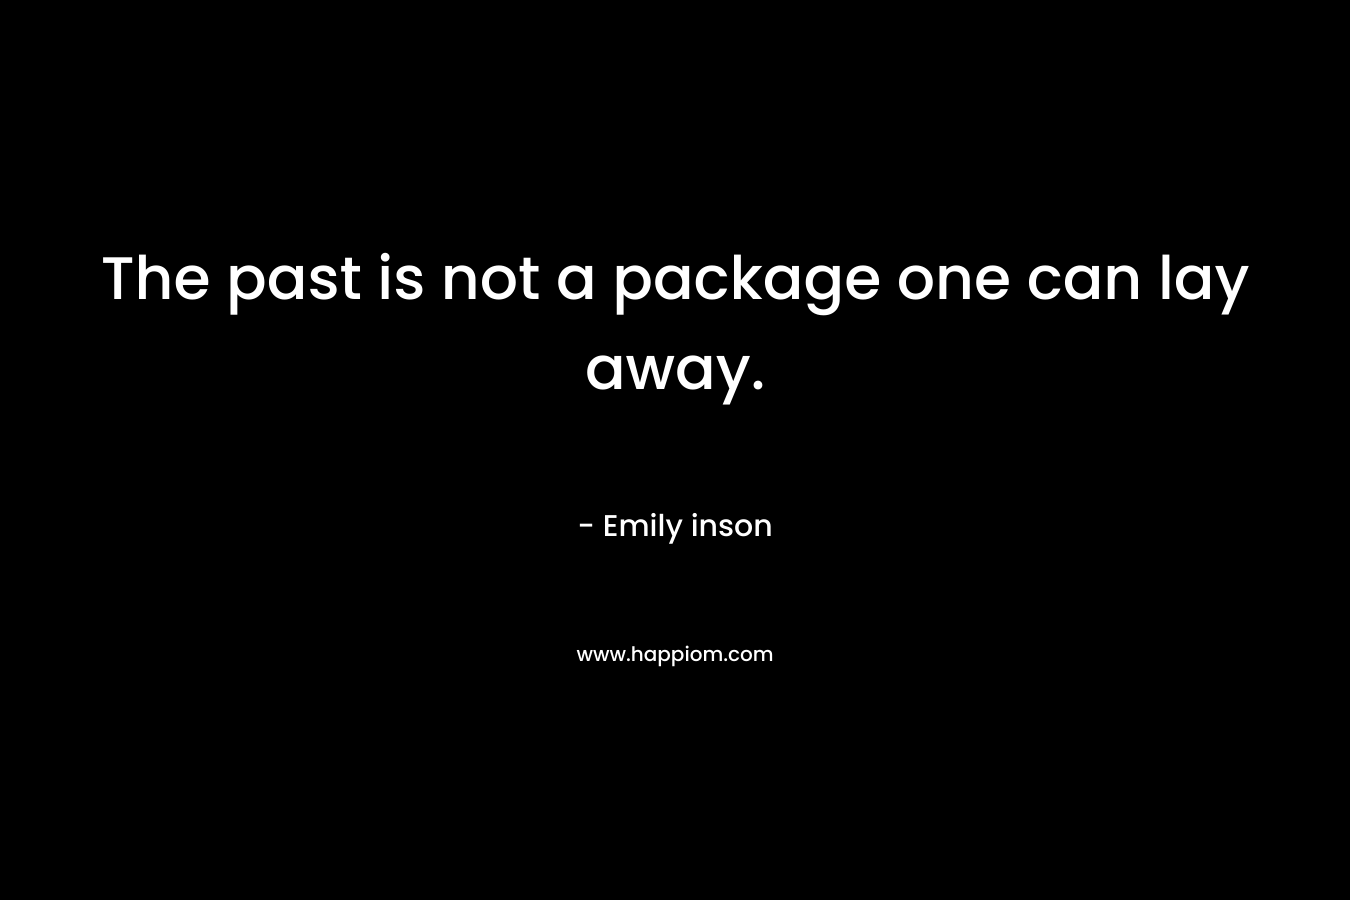 The past is not a package one can lay away.